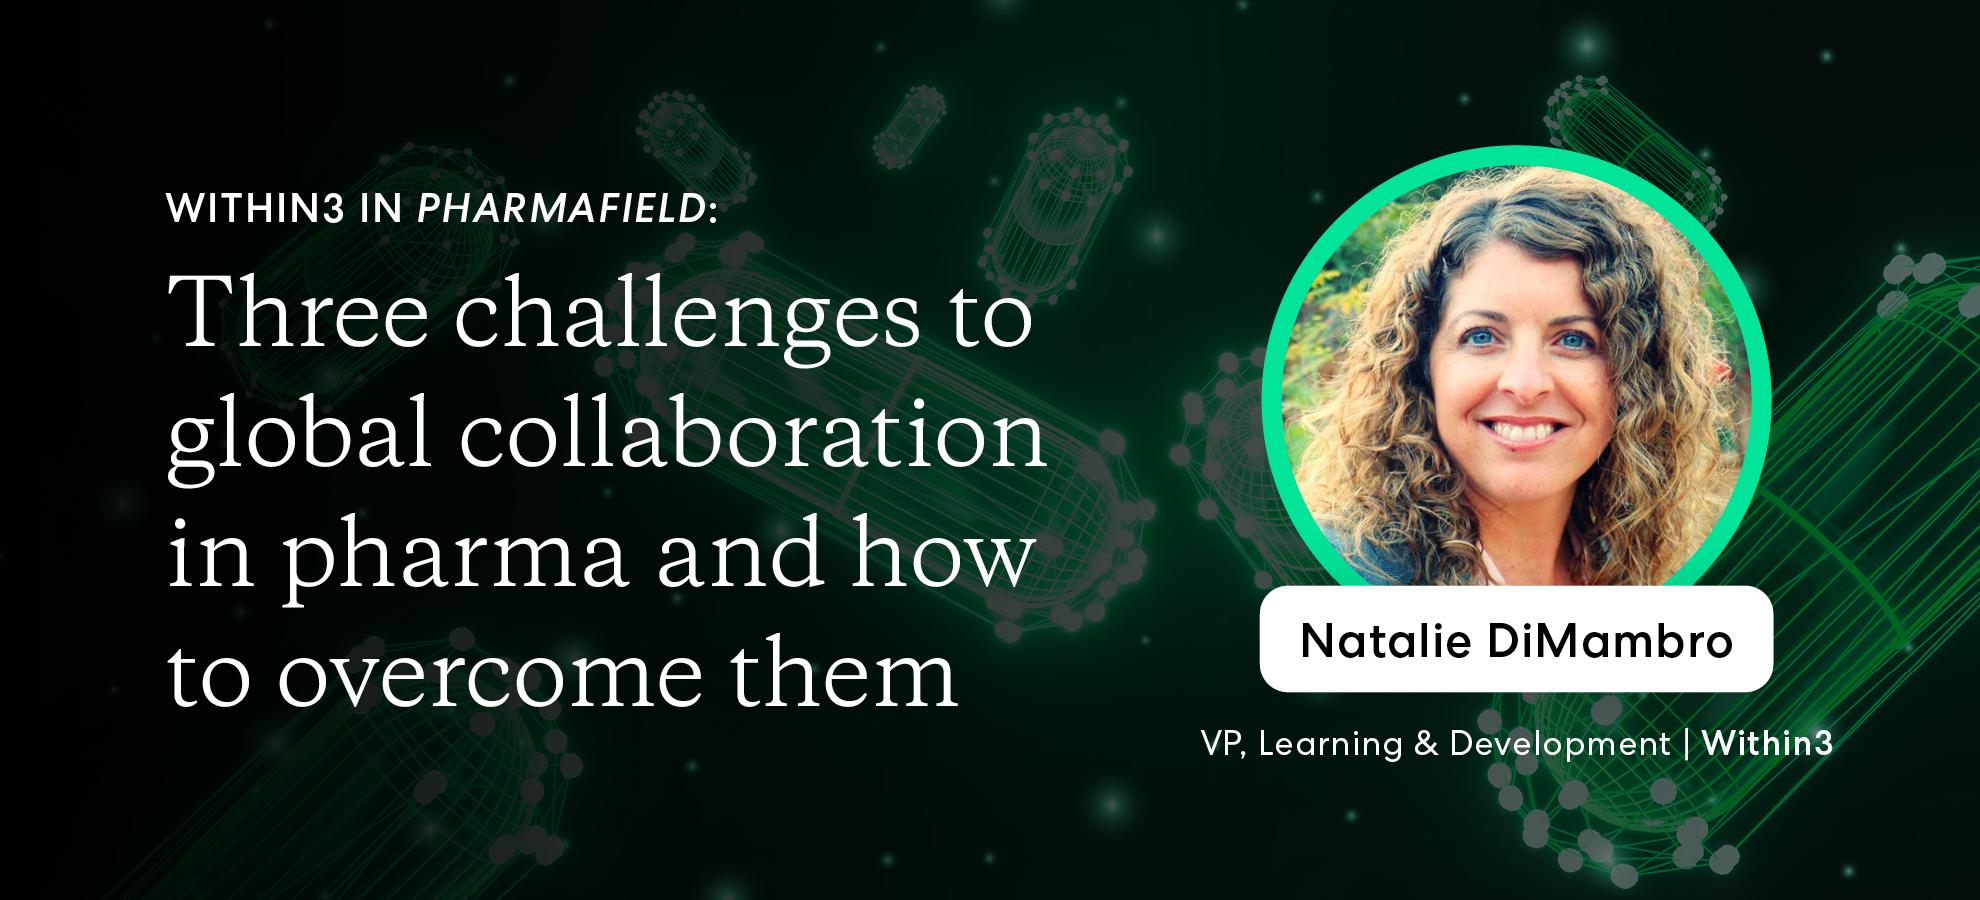 Within3 in Pharmafield: overcoming 3 key global collaboration challenges